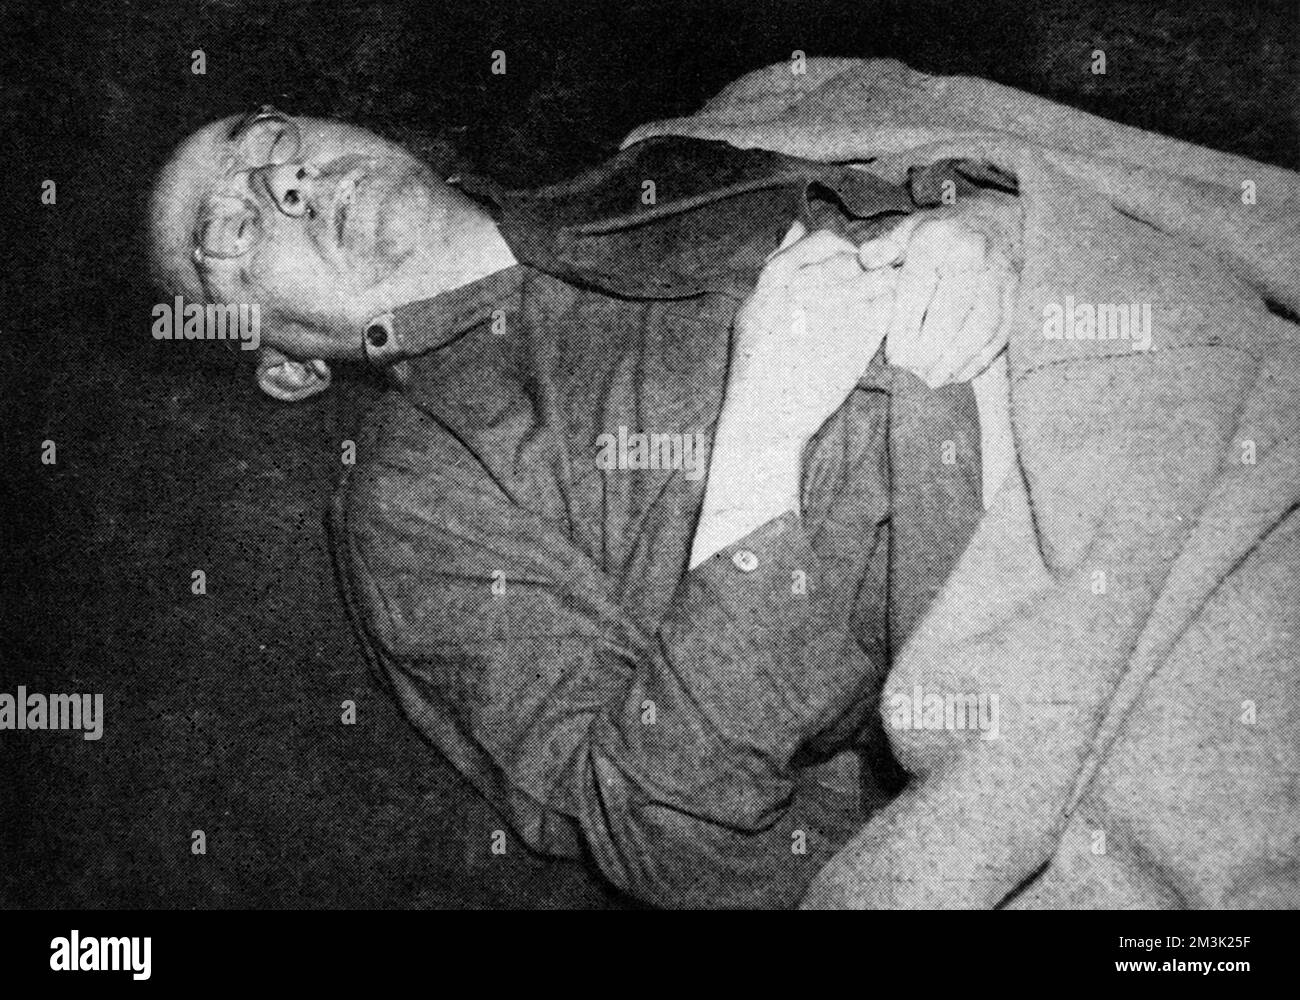 Photograph showing the corpse of Heinrich Himmler (1900-1945), the German Nazi leader and Chief-of-Police, shortly after he committed suicide at a Luneburg villa in May 1945.      He is shown wearing British Army clothing, which had been issued to him when he was captured.     Date: 1945 Stock Photo